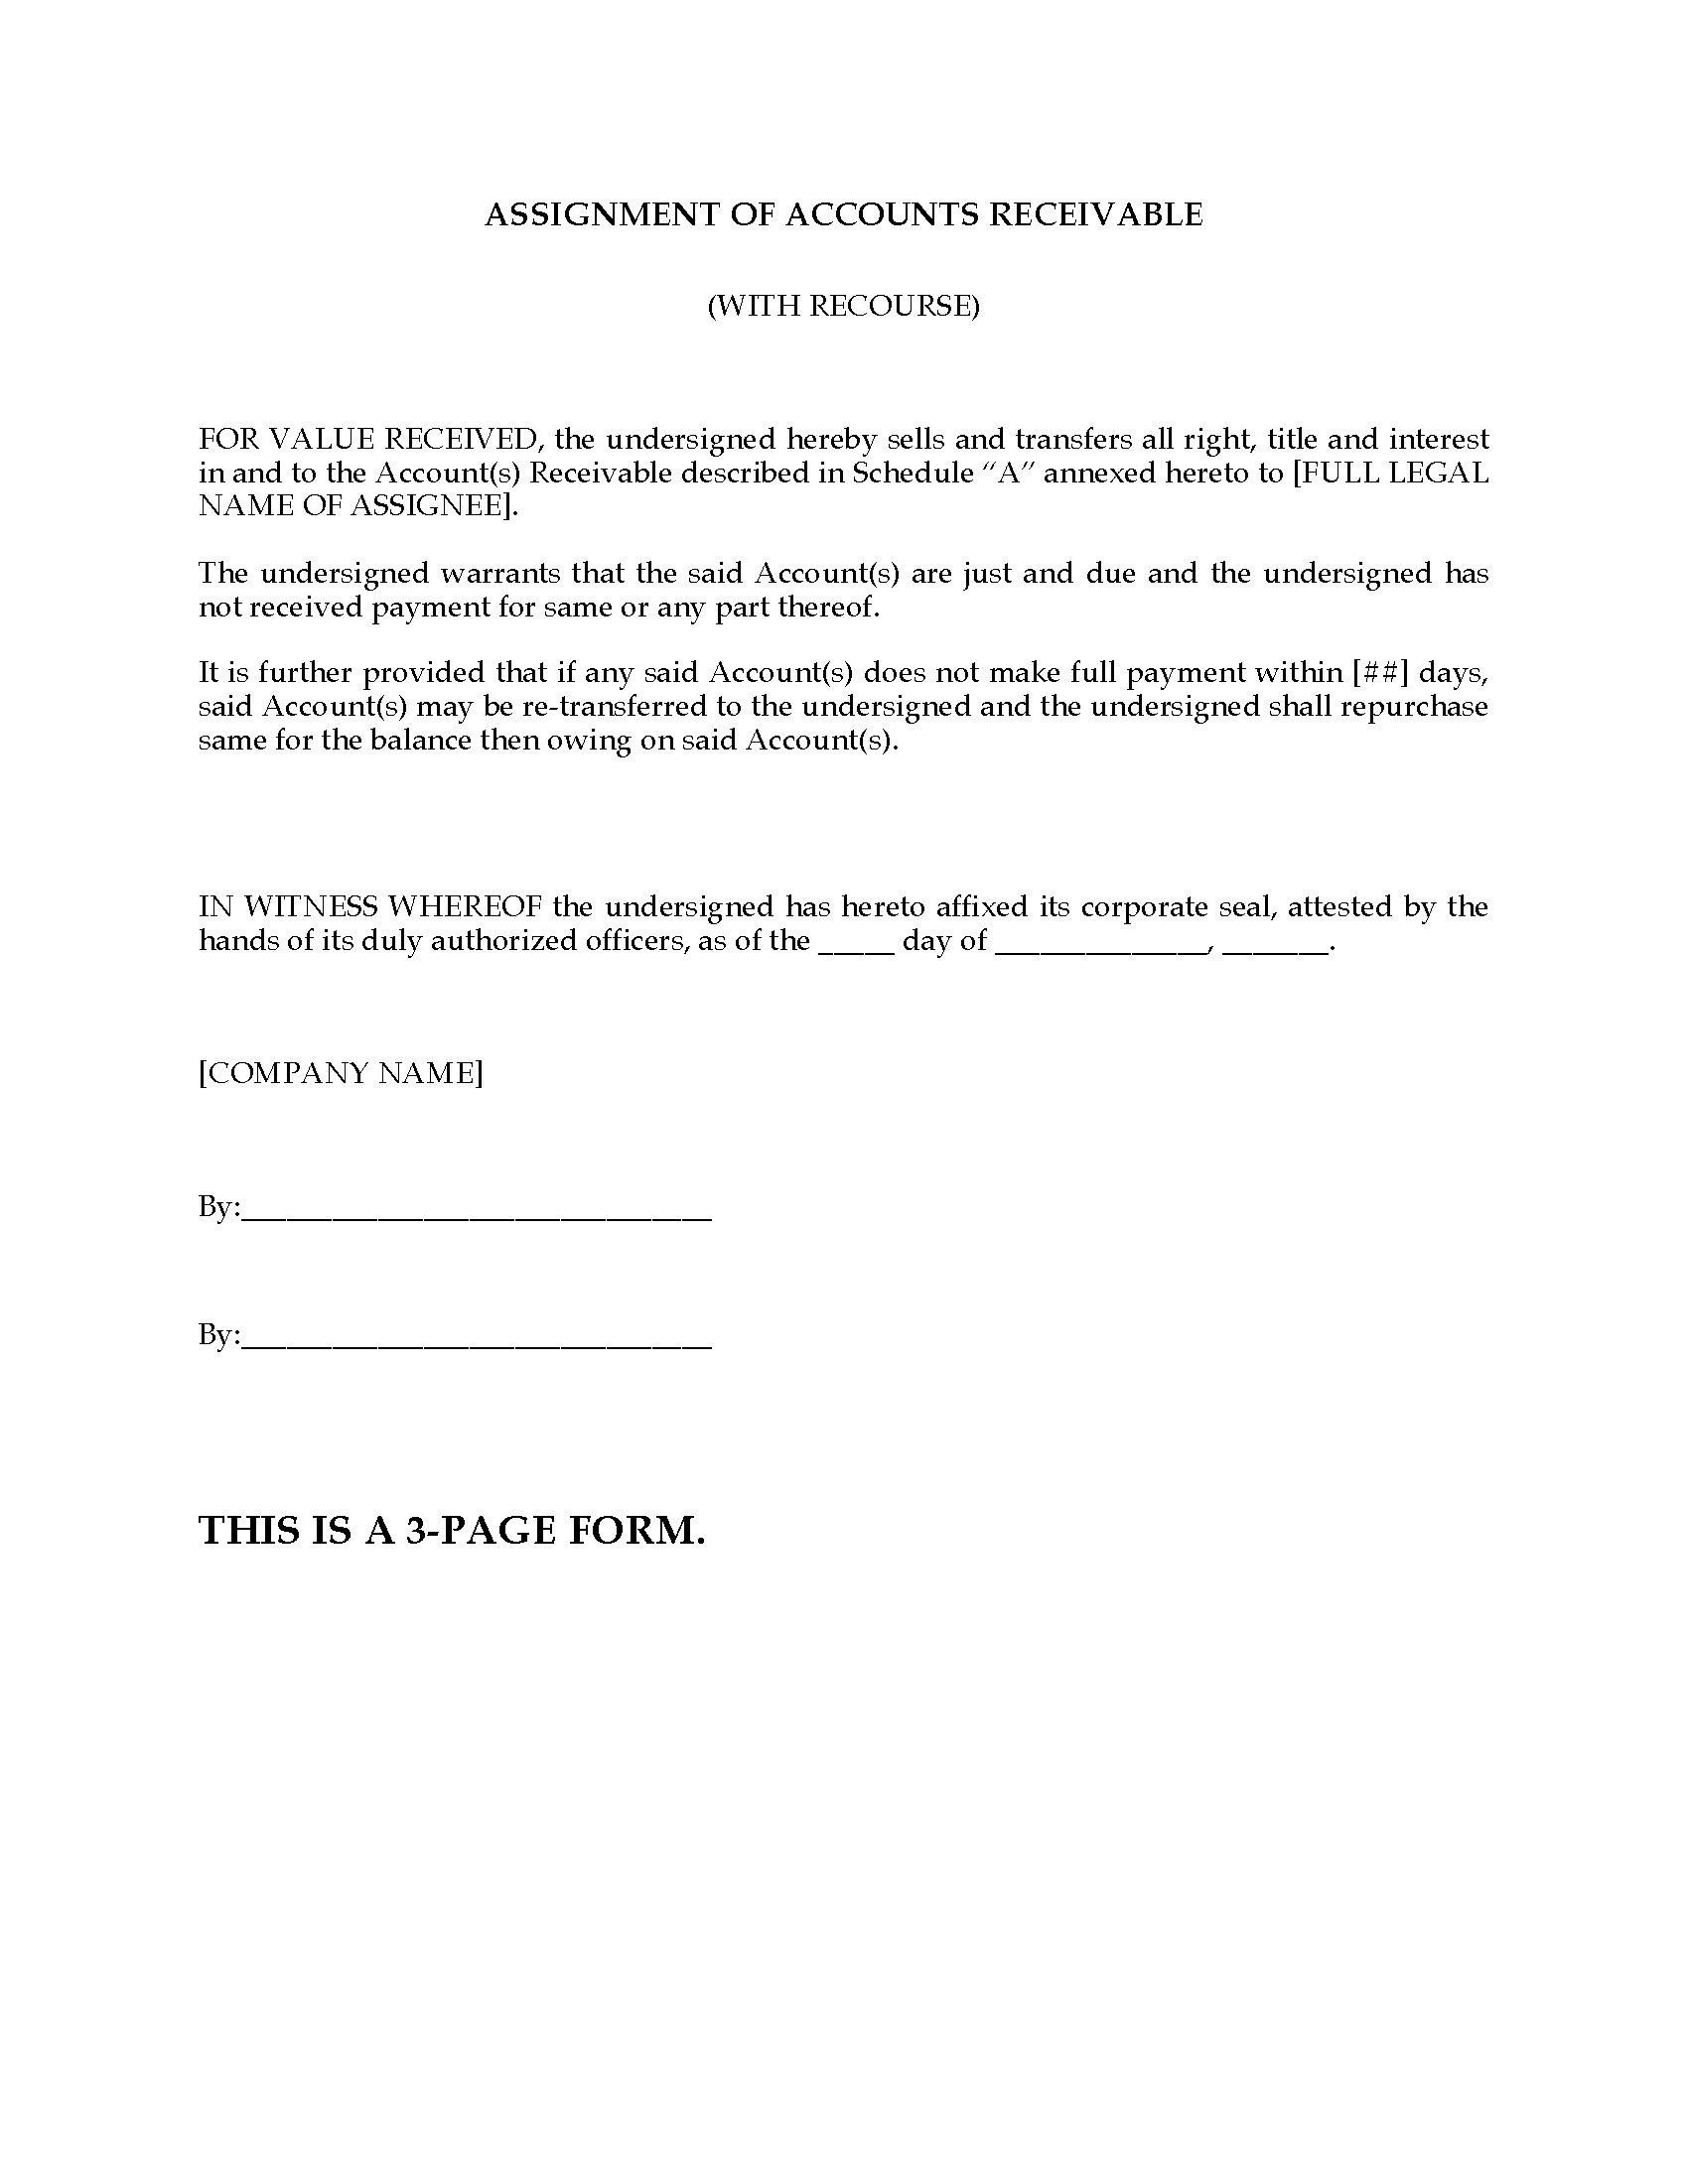 assignment of receivables agreement template